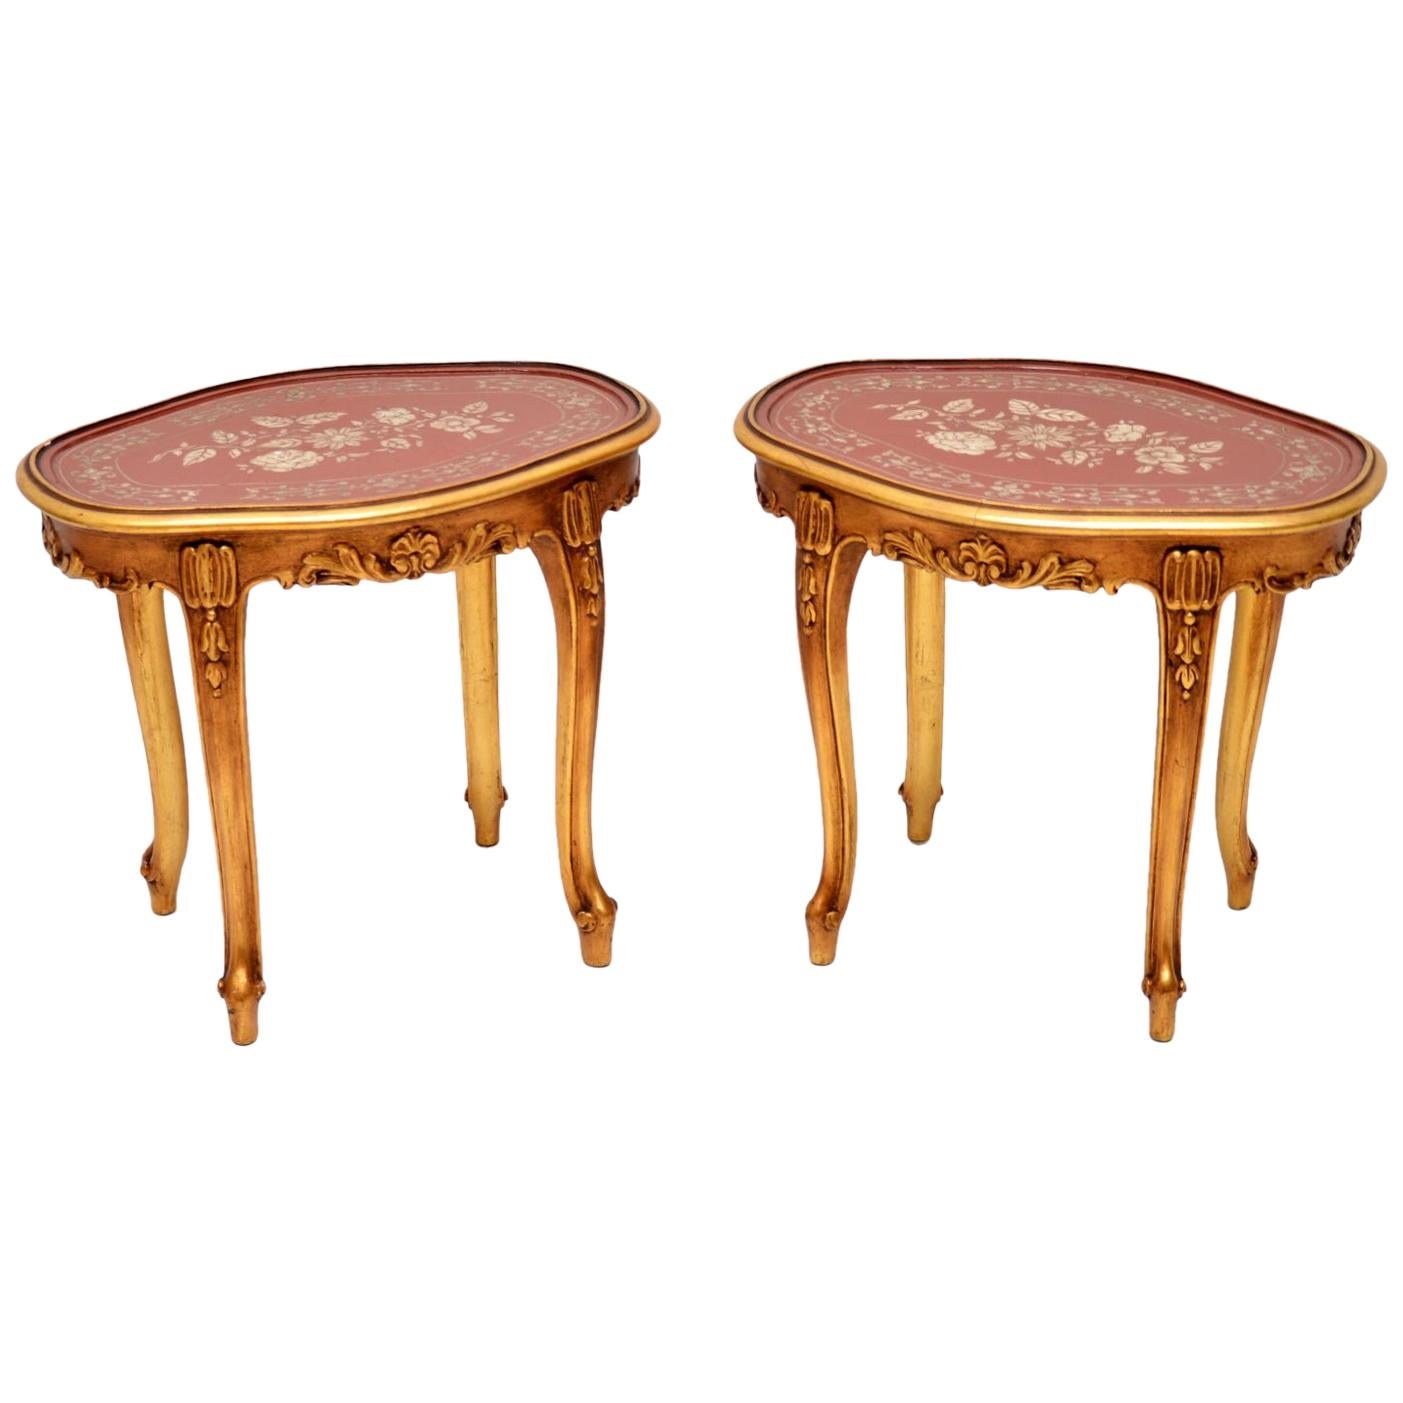 Pair of Antique French Style Giltwood Side Tables